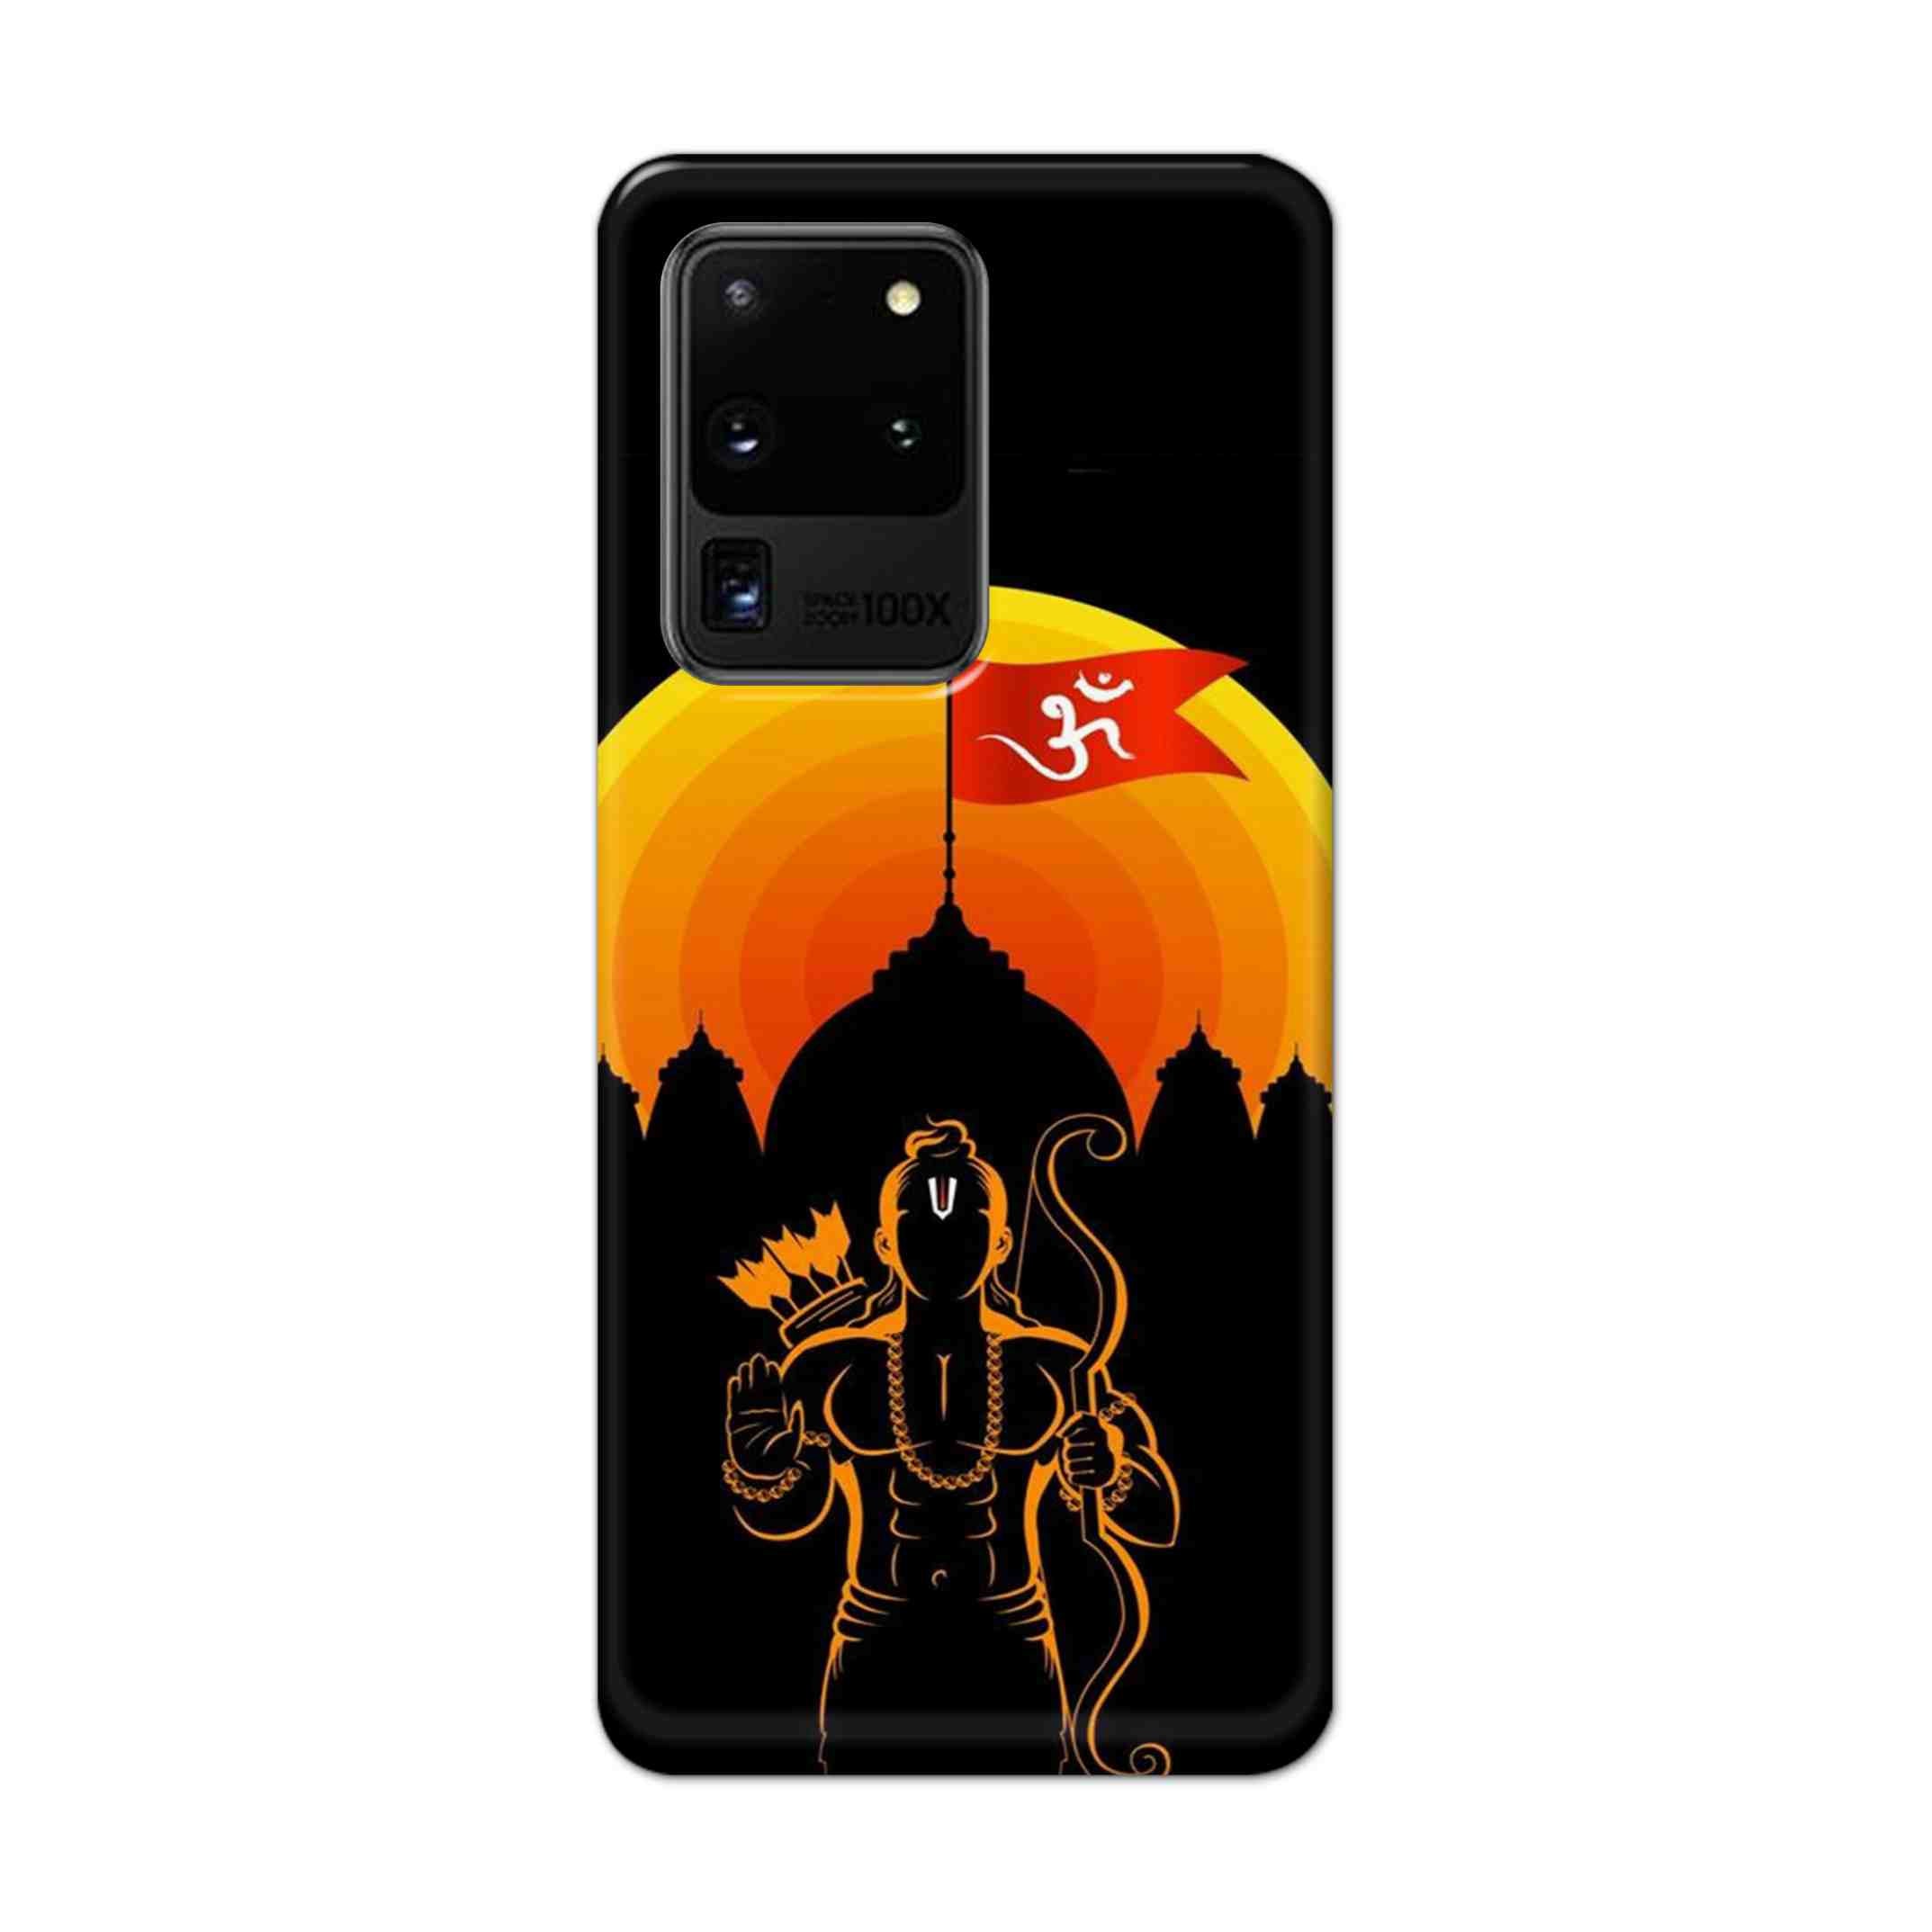 Buy Ram Ji Hard Back Mobile Phone Case Cover For Samsung Galaxy S20 Ultra Online